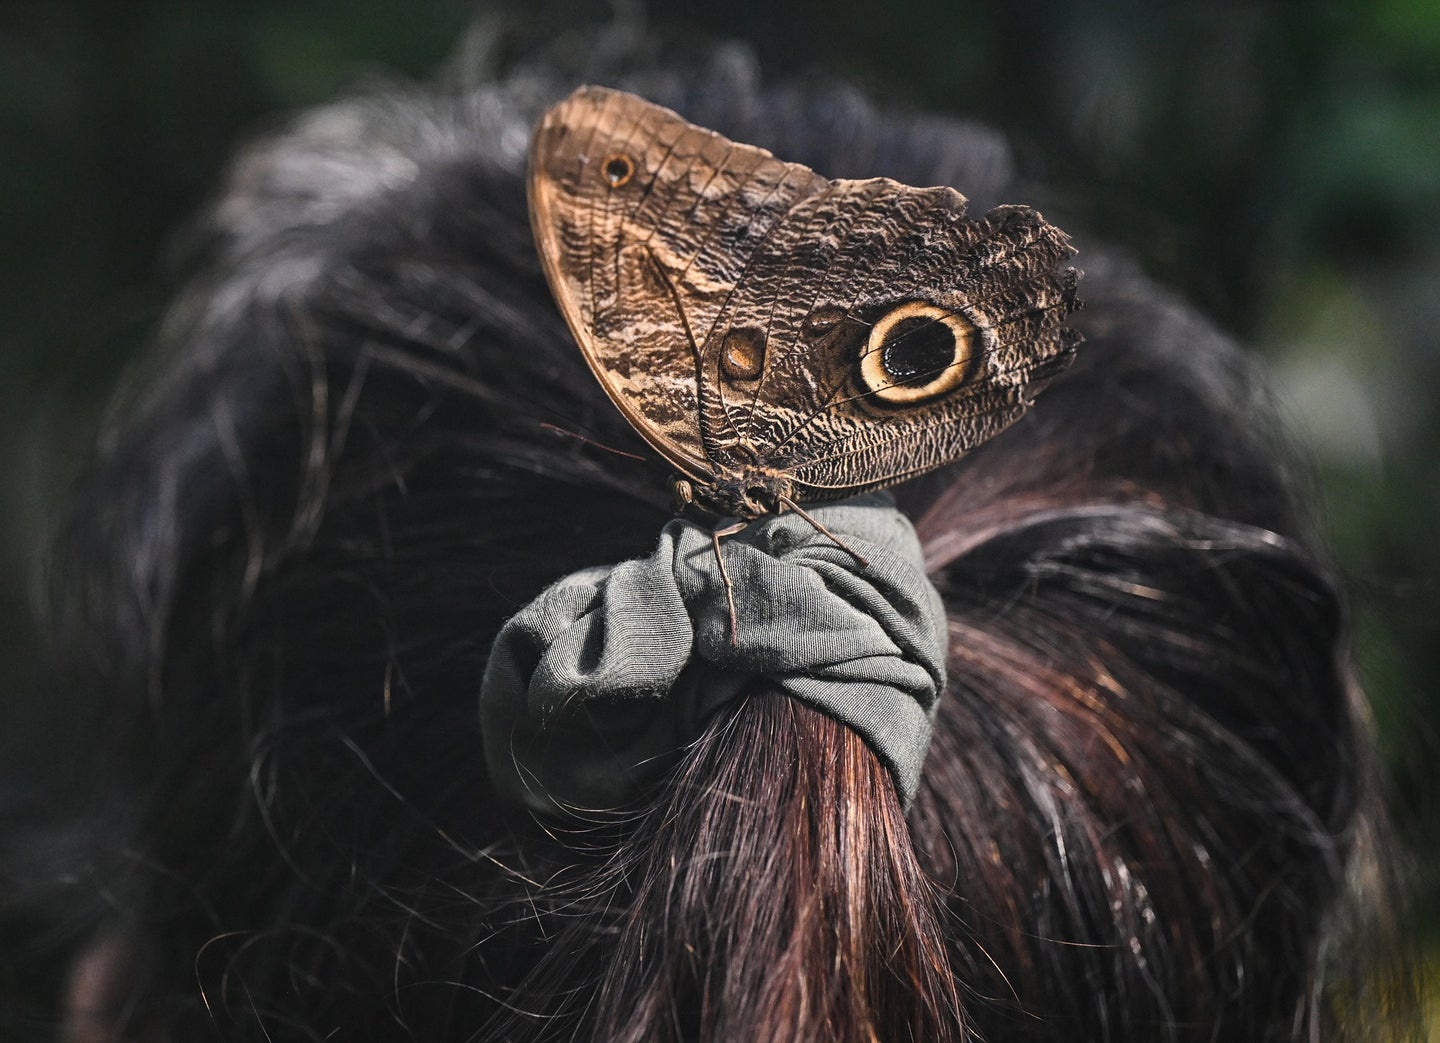 Banana butterfly on person's brown ponytail at butterfly house in Frankfurt, Germany